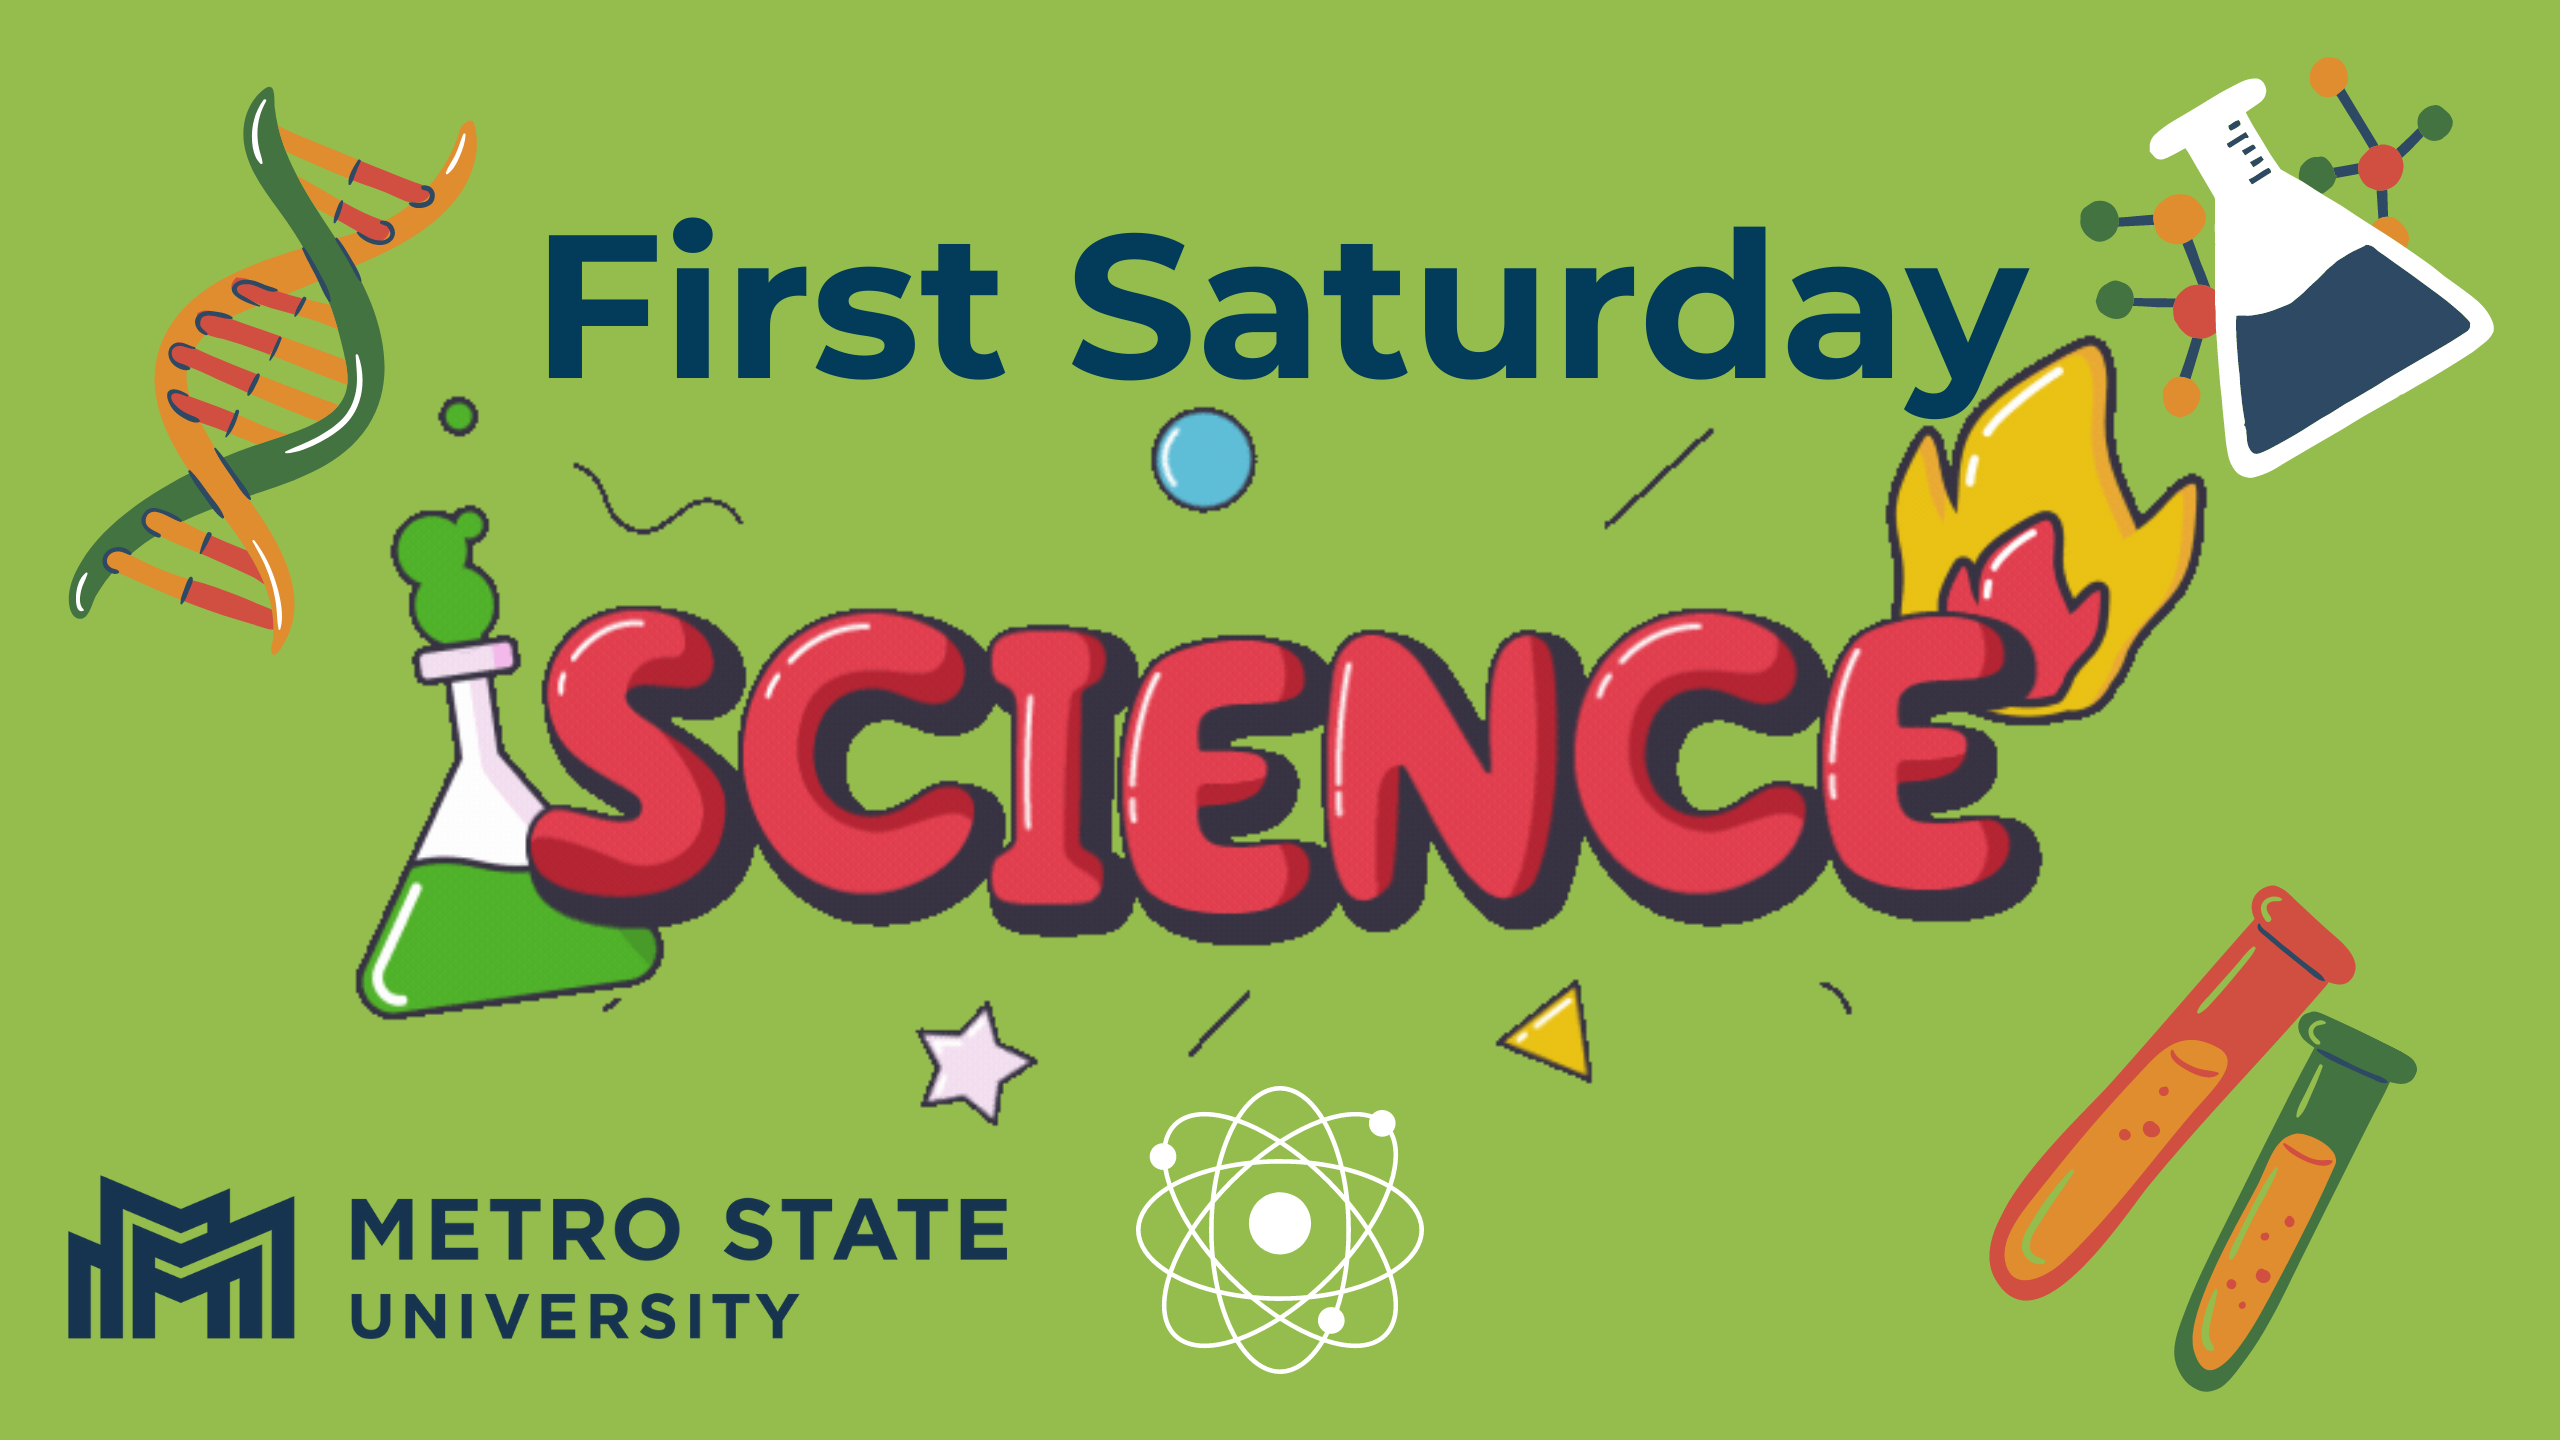 First Saturday Science, against a green backdrop with icons of DNA, beakers, test tubes, an atom, and fire surrounding it